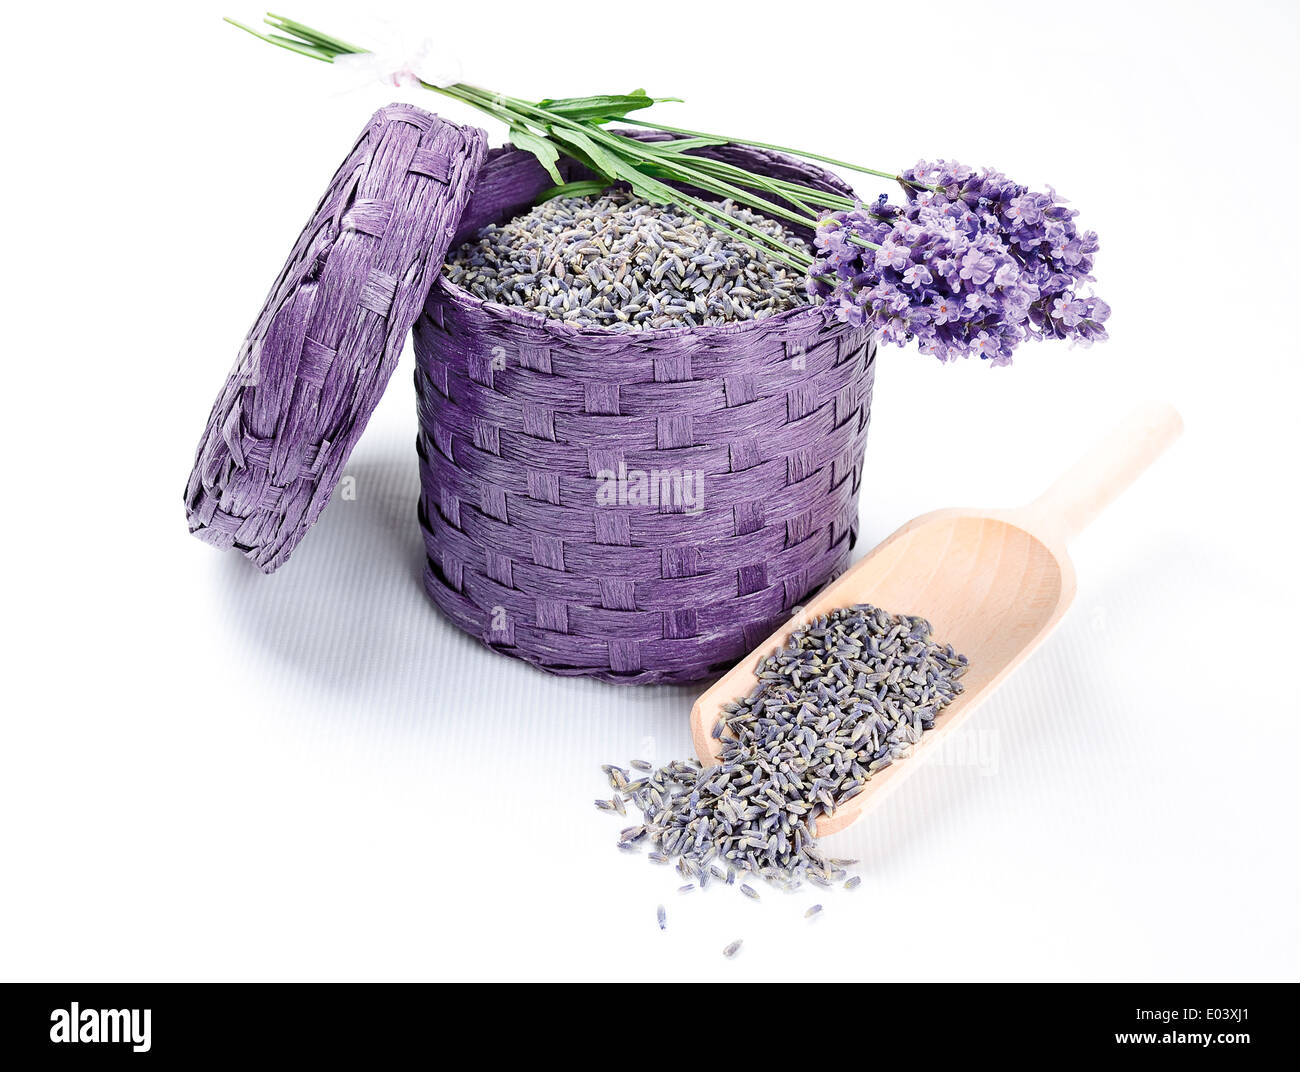 Fresh And Dry Lavender Flowers - Dried and fresh lavender flowers in a bast basket with wooden shovel. Stock Photo